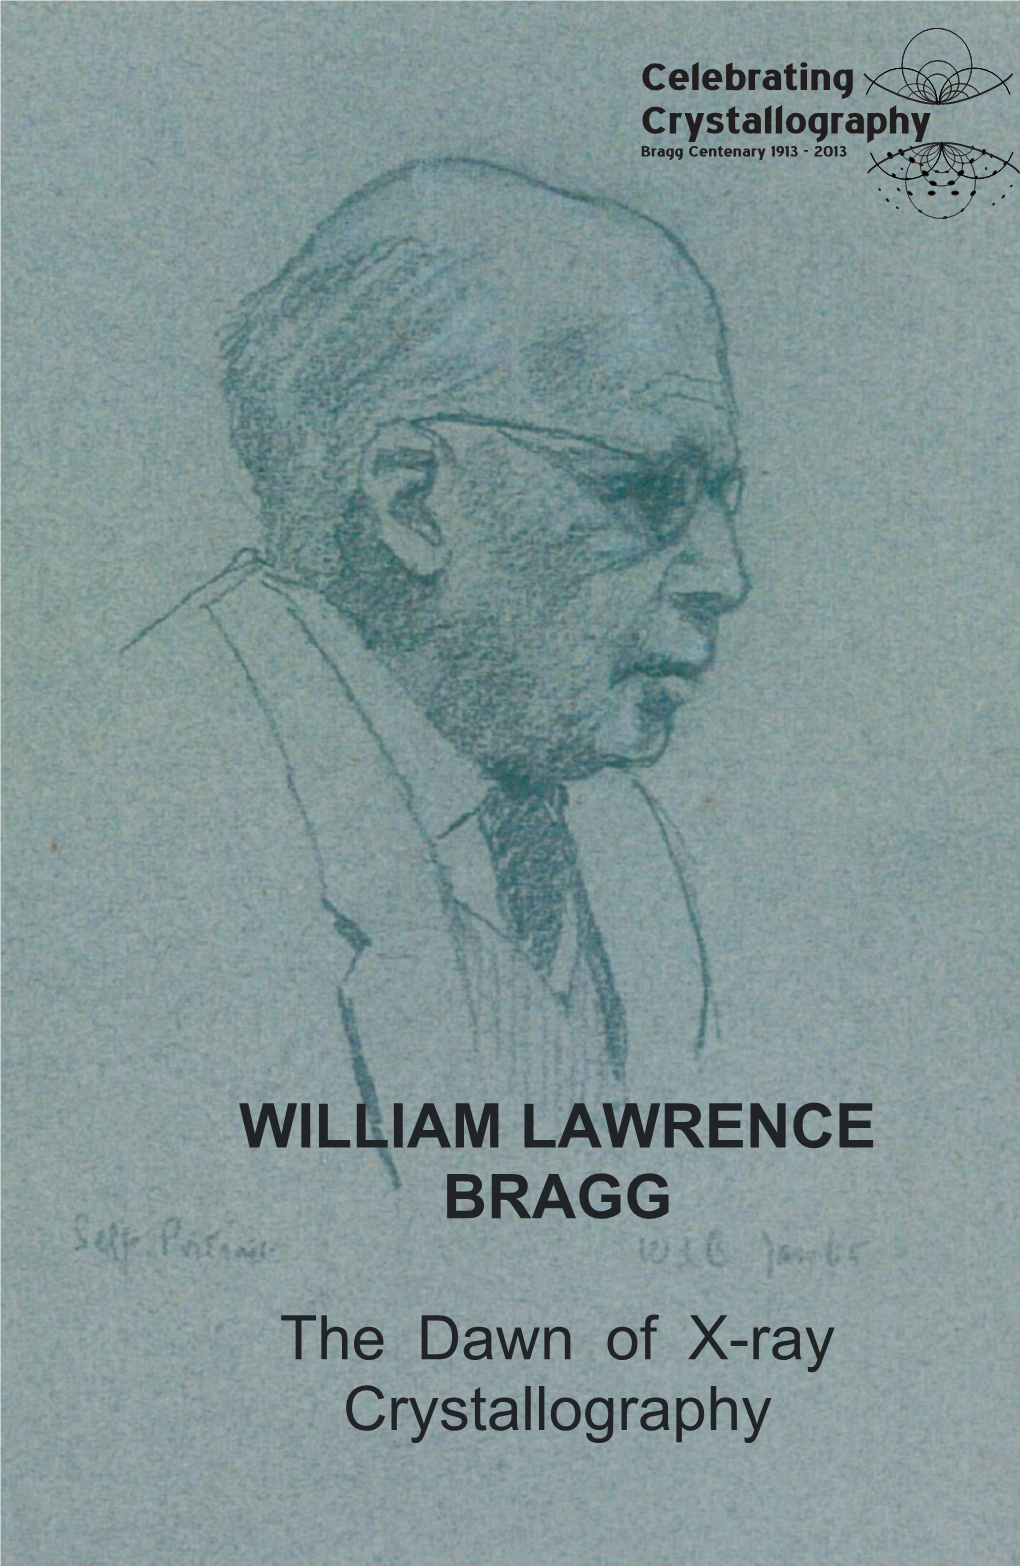 WILLIAM LAWRENCE BRAGG the Dawn of X-Ray Crystallography